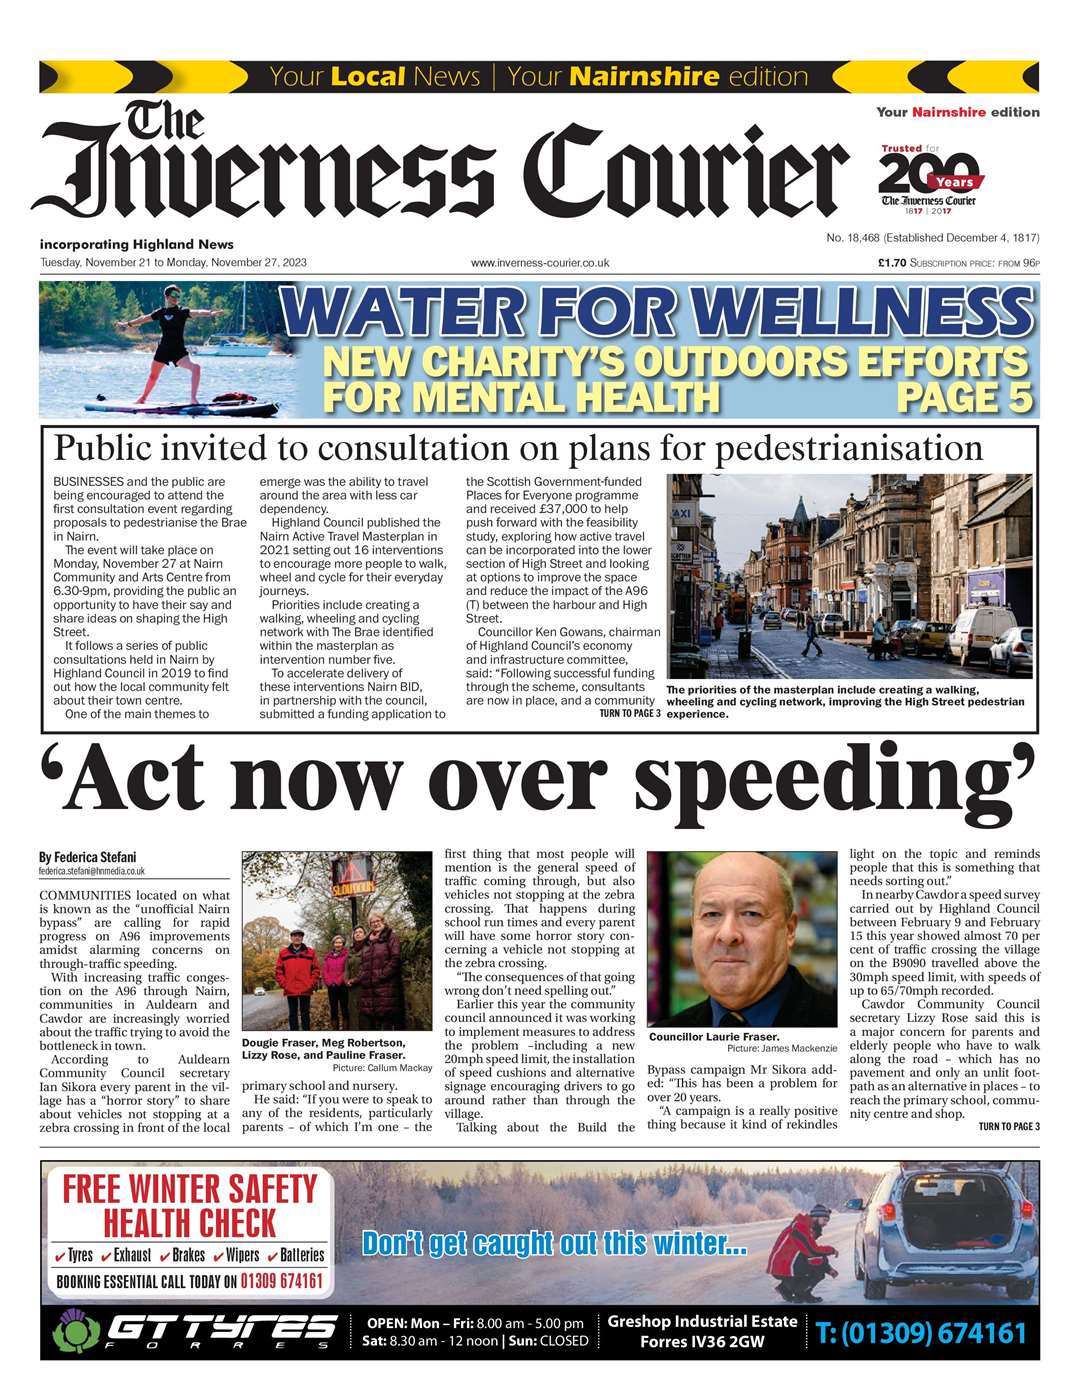 The Inverness Courier (Nairnshire edition), November 21, front page.